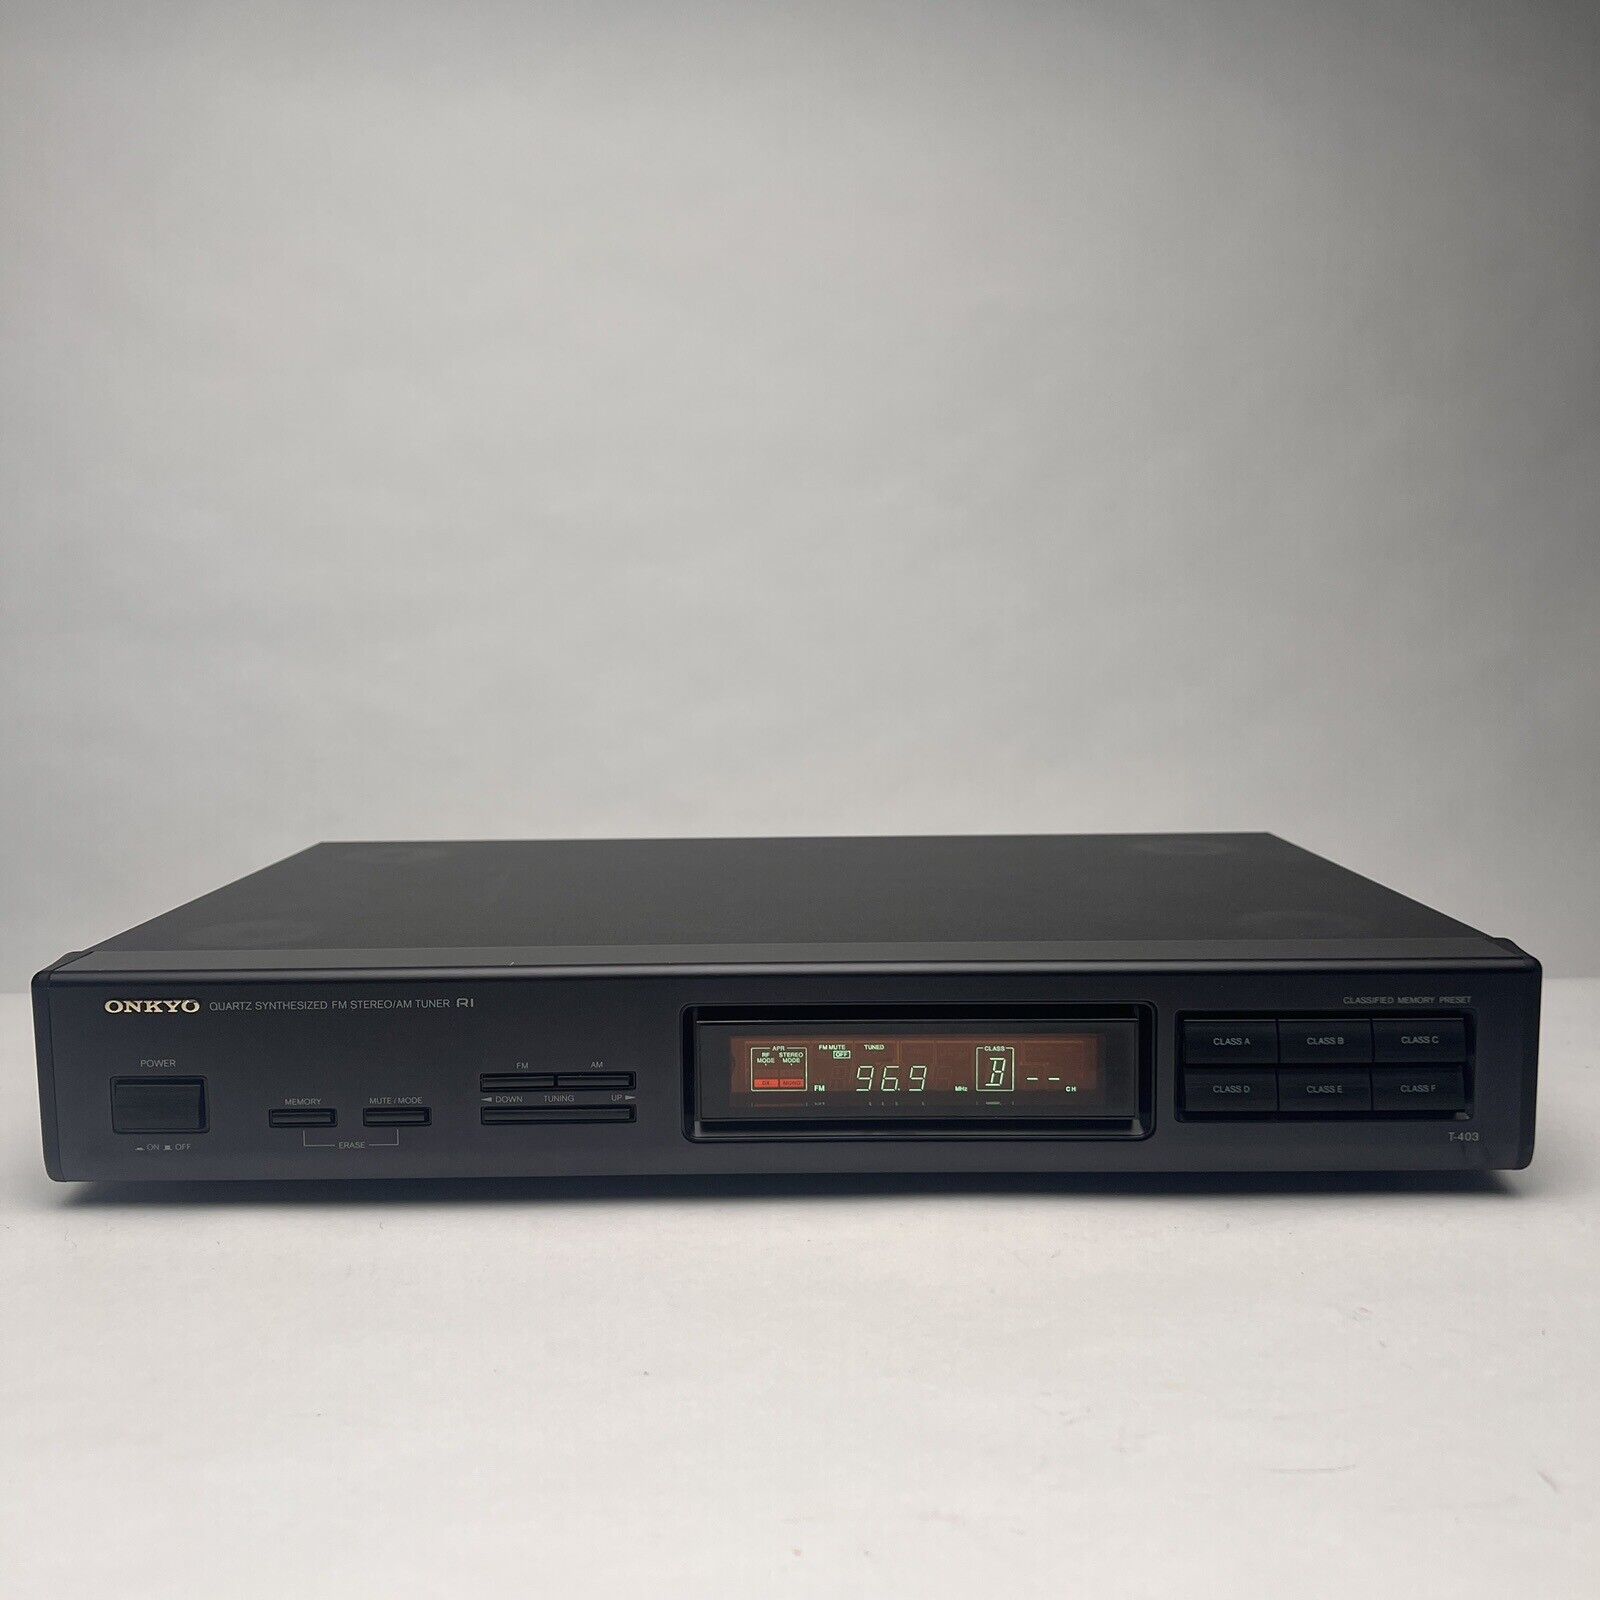 Onkyo T-403 Stereo AM/FM Tuner - Tested Working Perfect. Vintage 1990